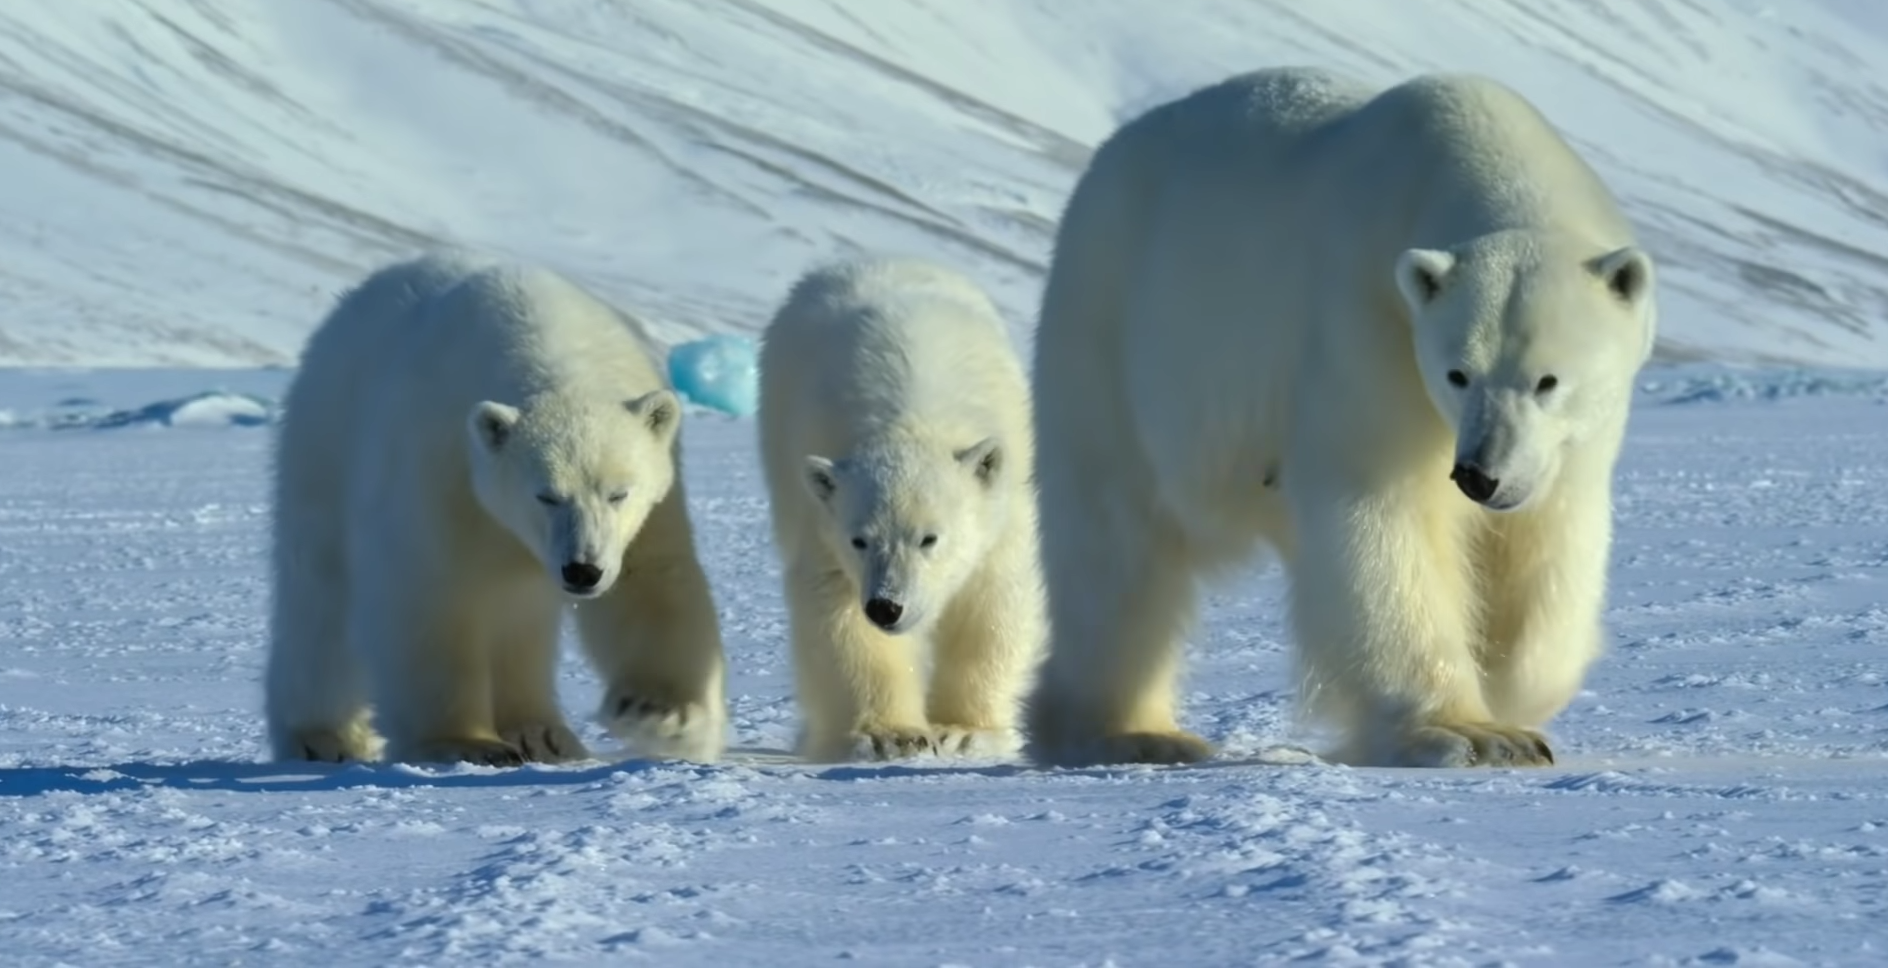 Misha and her cubs had a starring role in Netflix’s ‘Our Planet’ series